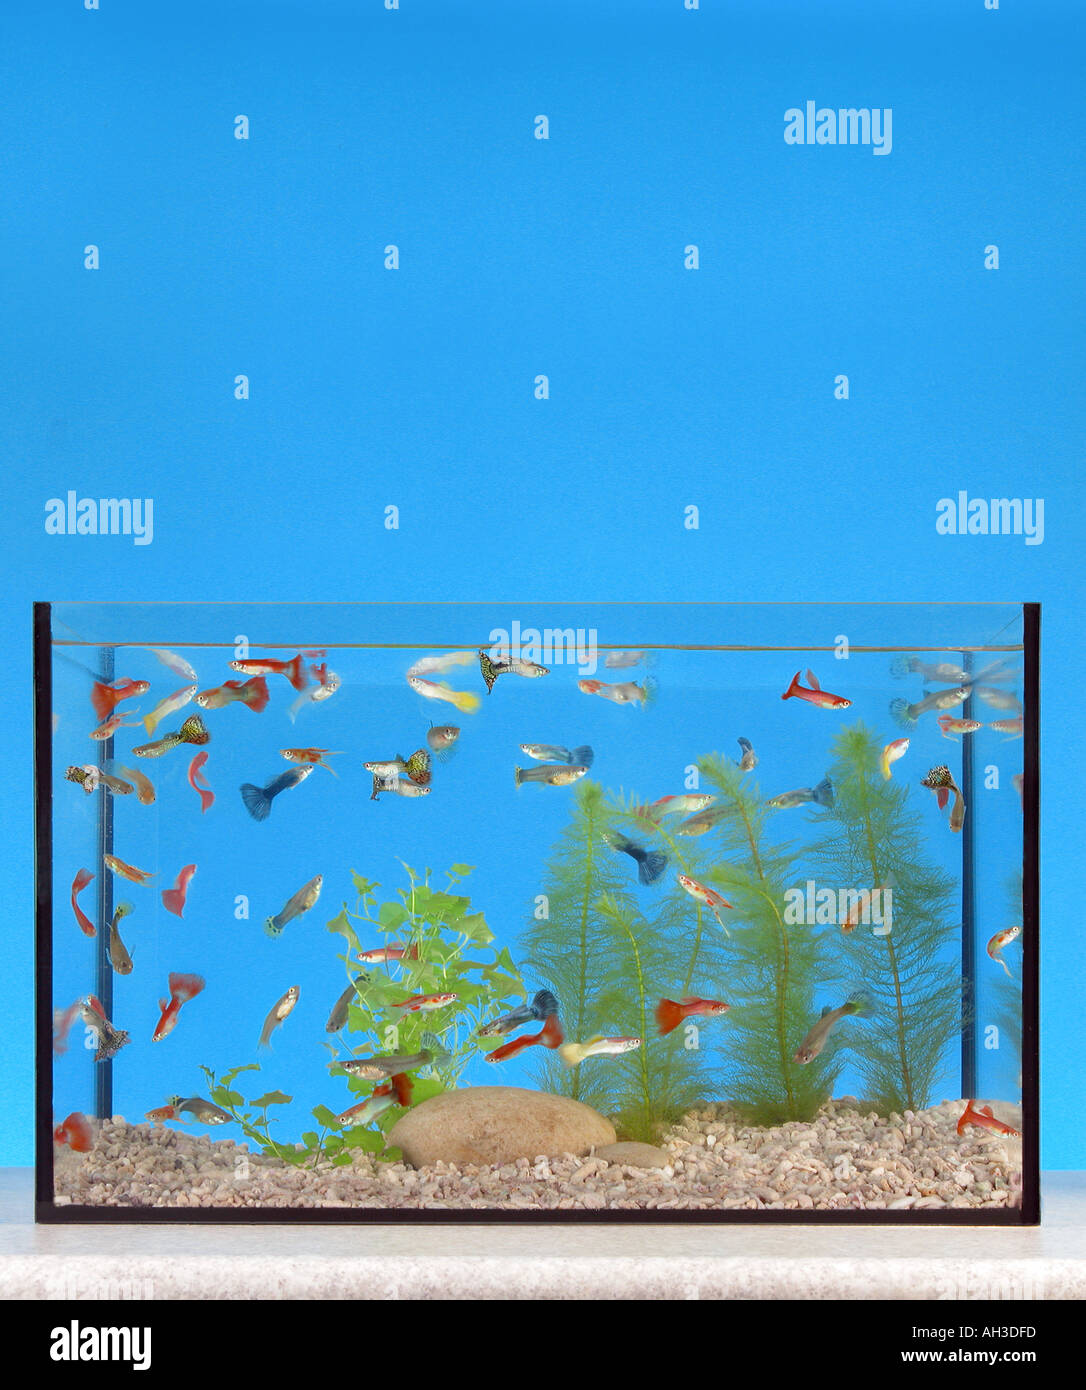 glass aquarium with guppy fishes free space for text headlines layouts  title GUPPIES GUPPIS Stock Photo - Alamy